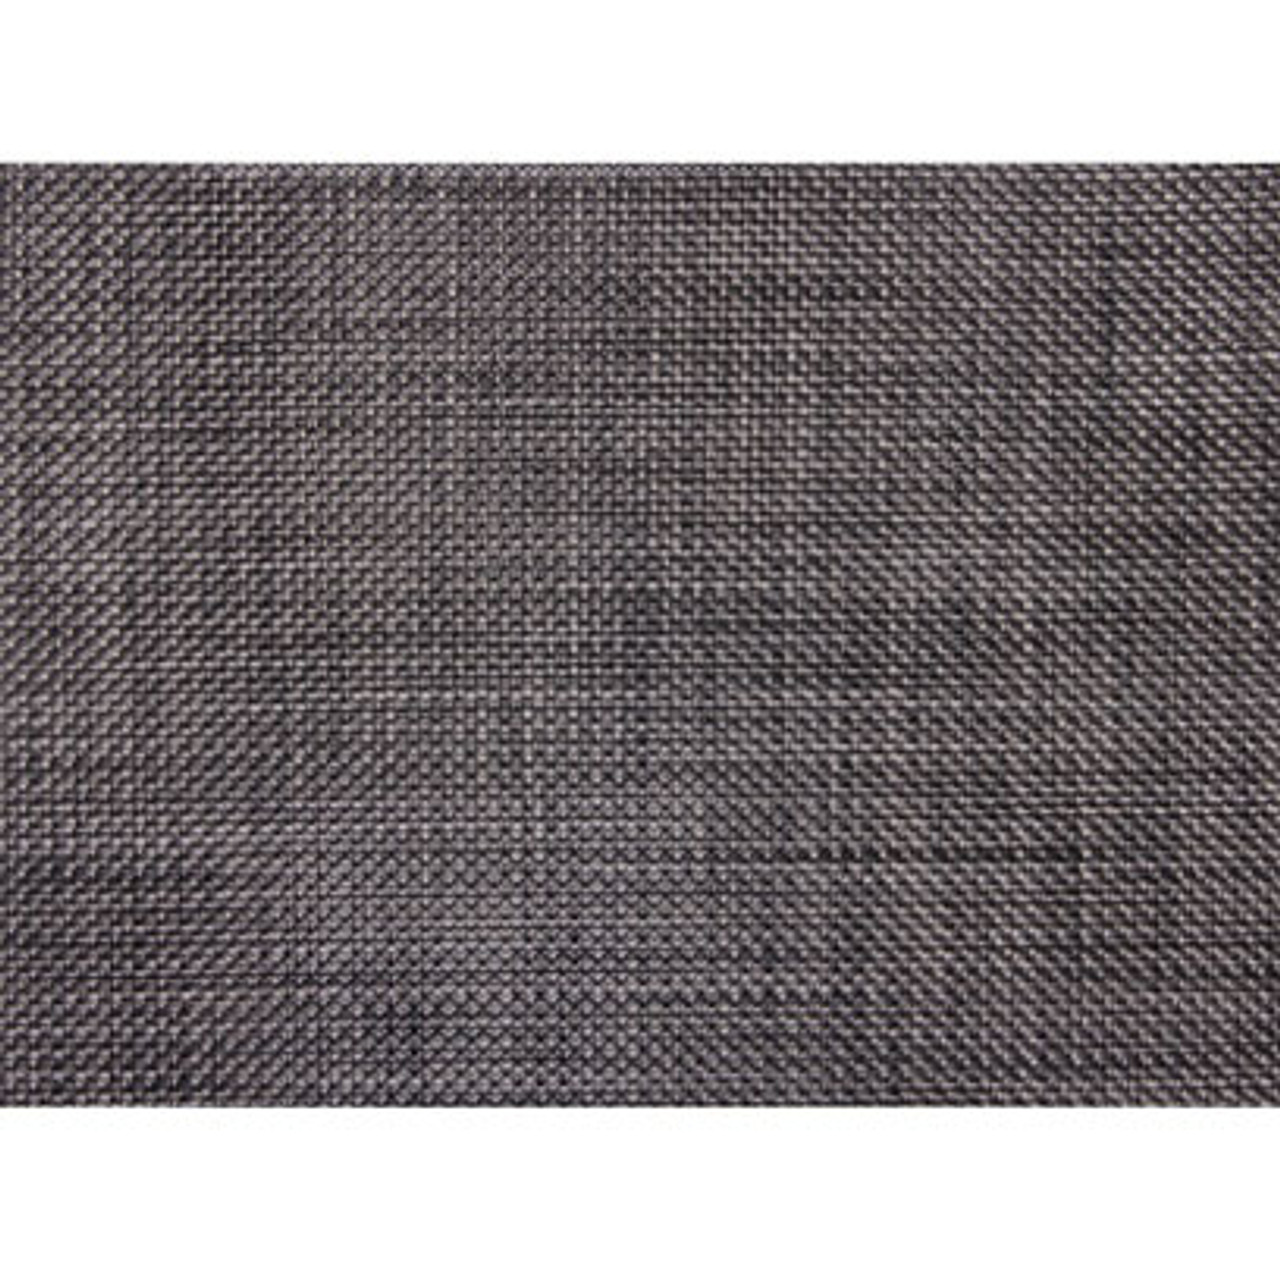 https://cdn11.bigcommerce.com/s-e0xlh4avpe/images/stencil/1280x1280/products/85637/112255/chilewich-basketweave-table-mat-14x19-carbon-26__37739.1650921050.jpg?c=1